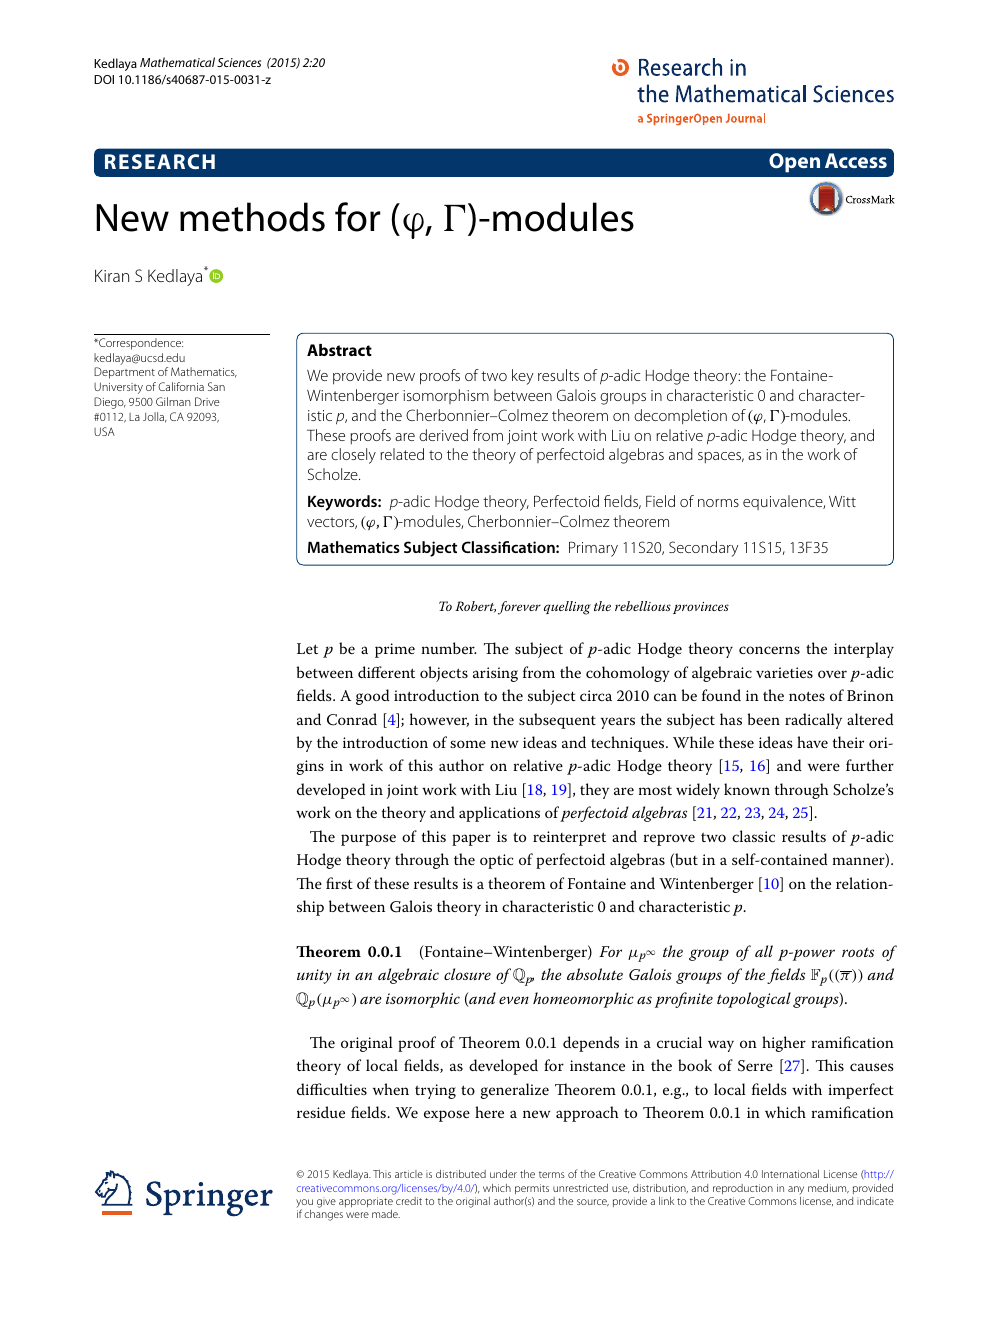 New Methods For Varphi Gamma F G Modules Topic Of Research Paper In Mathematics Download Scholarly Article Pdf And Read For Free On Cyberleninka Open Science Hub